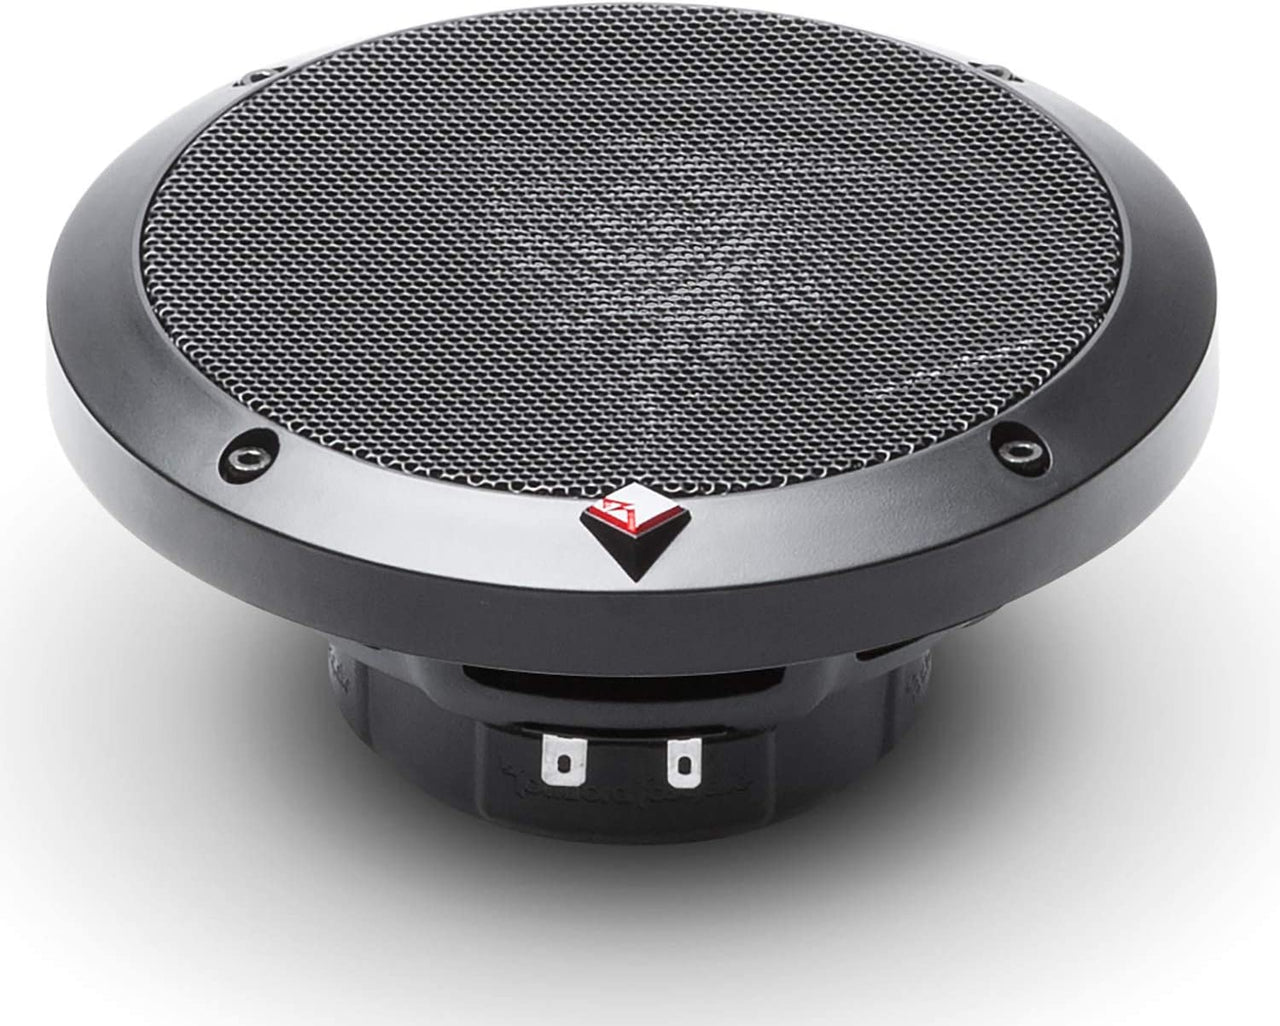 2 Rockford Fosgate Punch P165-SI 240W Peak (120W RMS) 6.5" 2-Way Component System with Internal Crossover